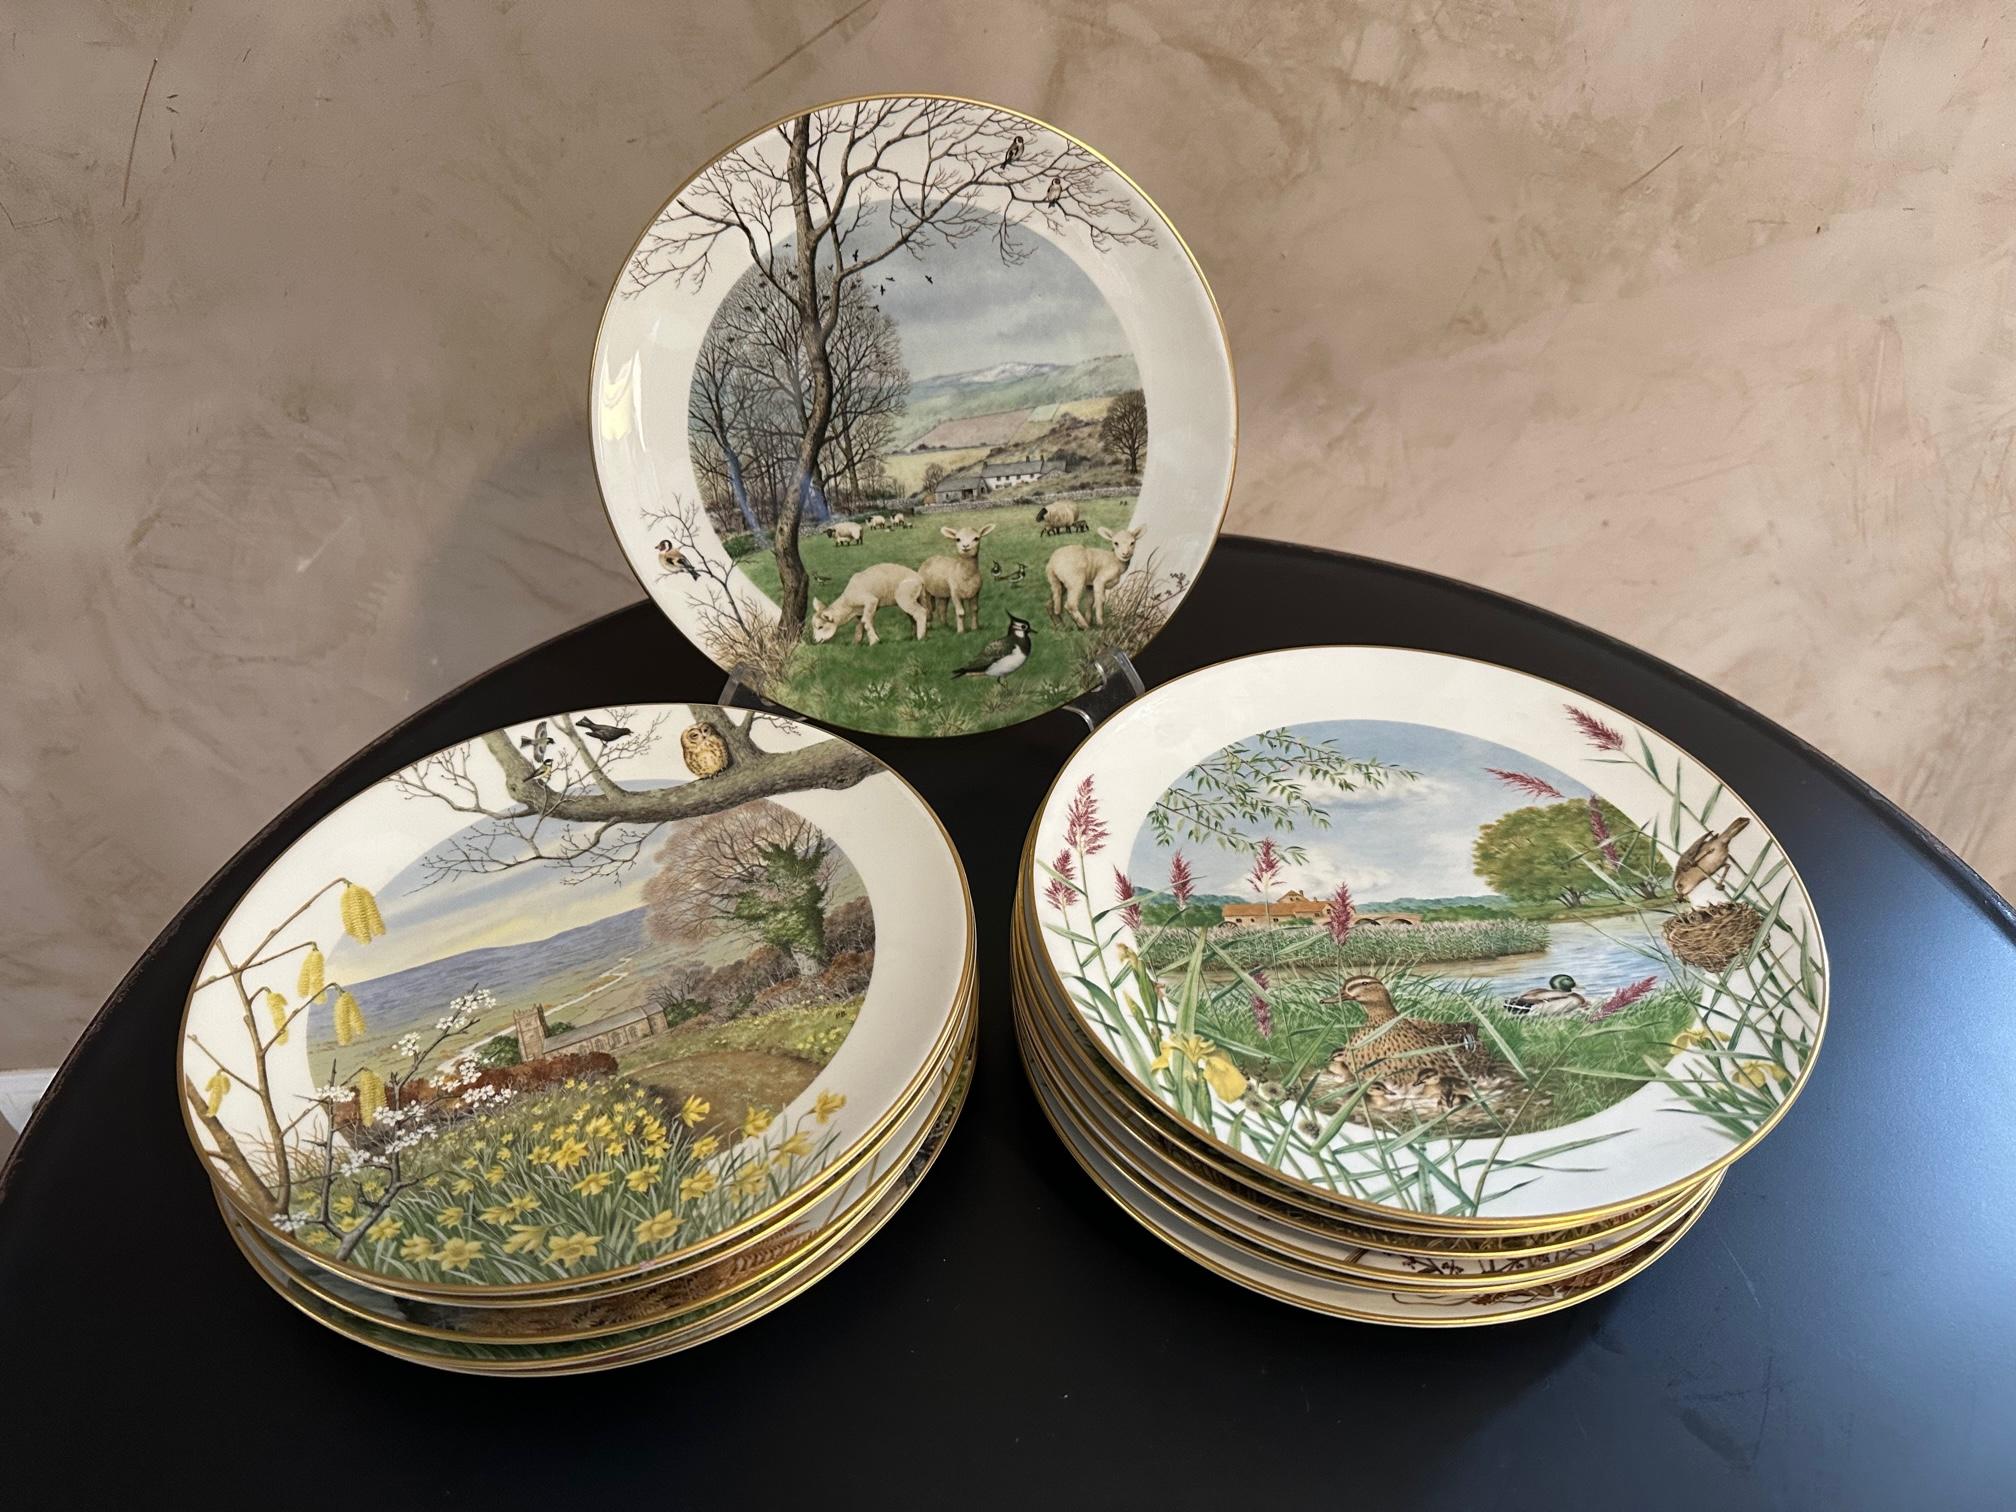 Very beautiful set of 12 Franklin porcelain plates, this is a collection which was created by Peter Barrett for Royal Worcester. 
Limited edition from the 70s representing the 12 months of the year. 
English countryside scene. The plates are edged